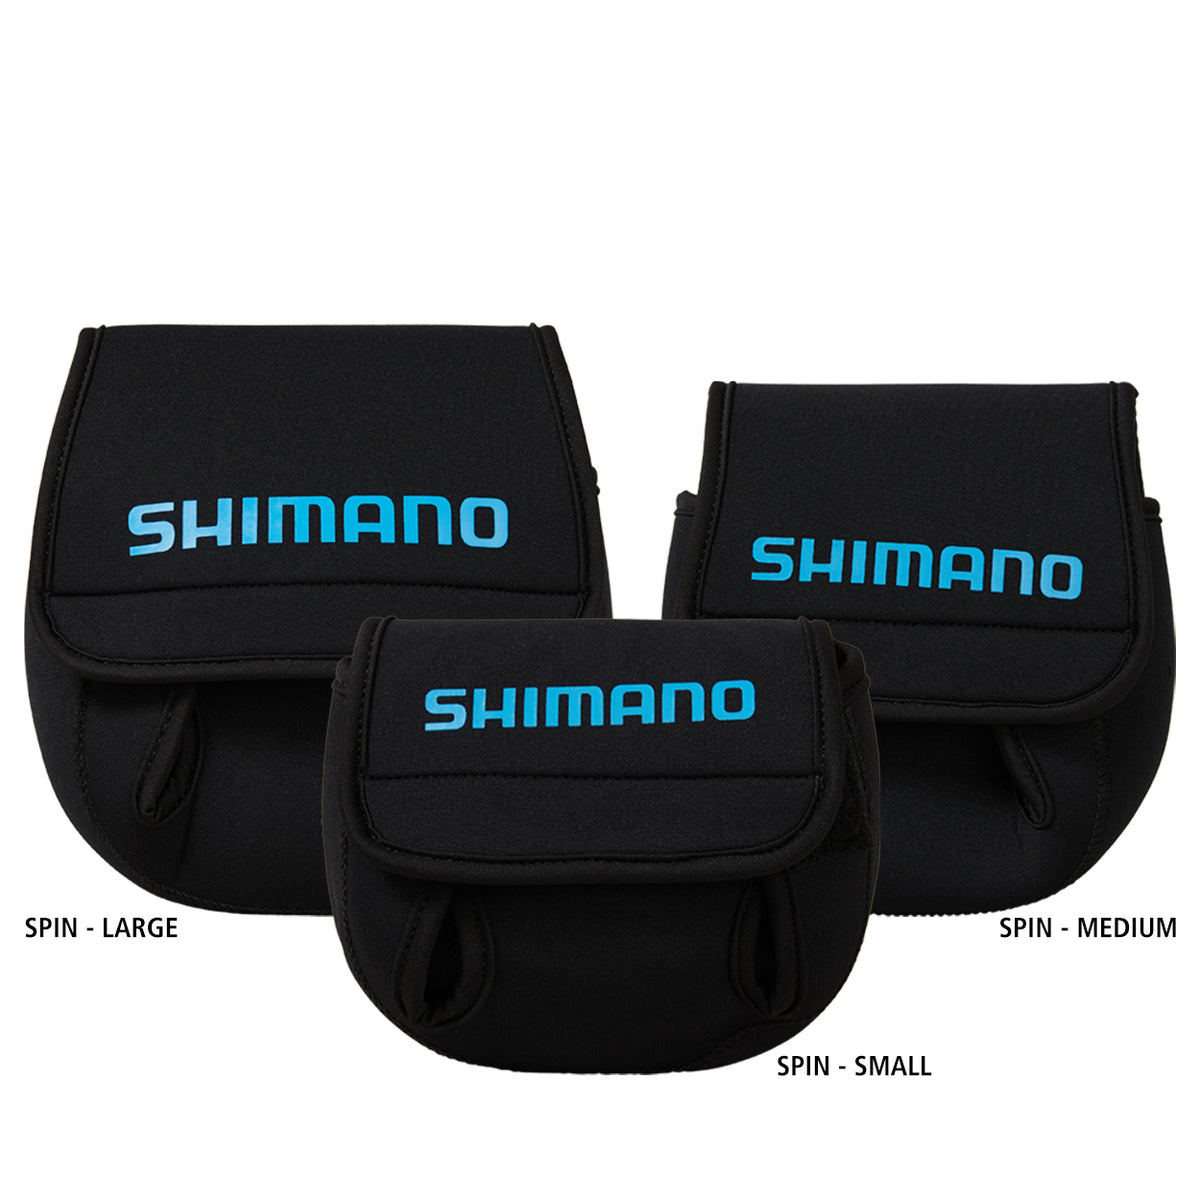 Shimano Reel Cover for Spin Reel